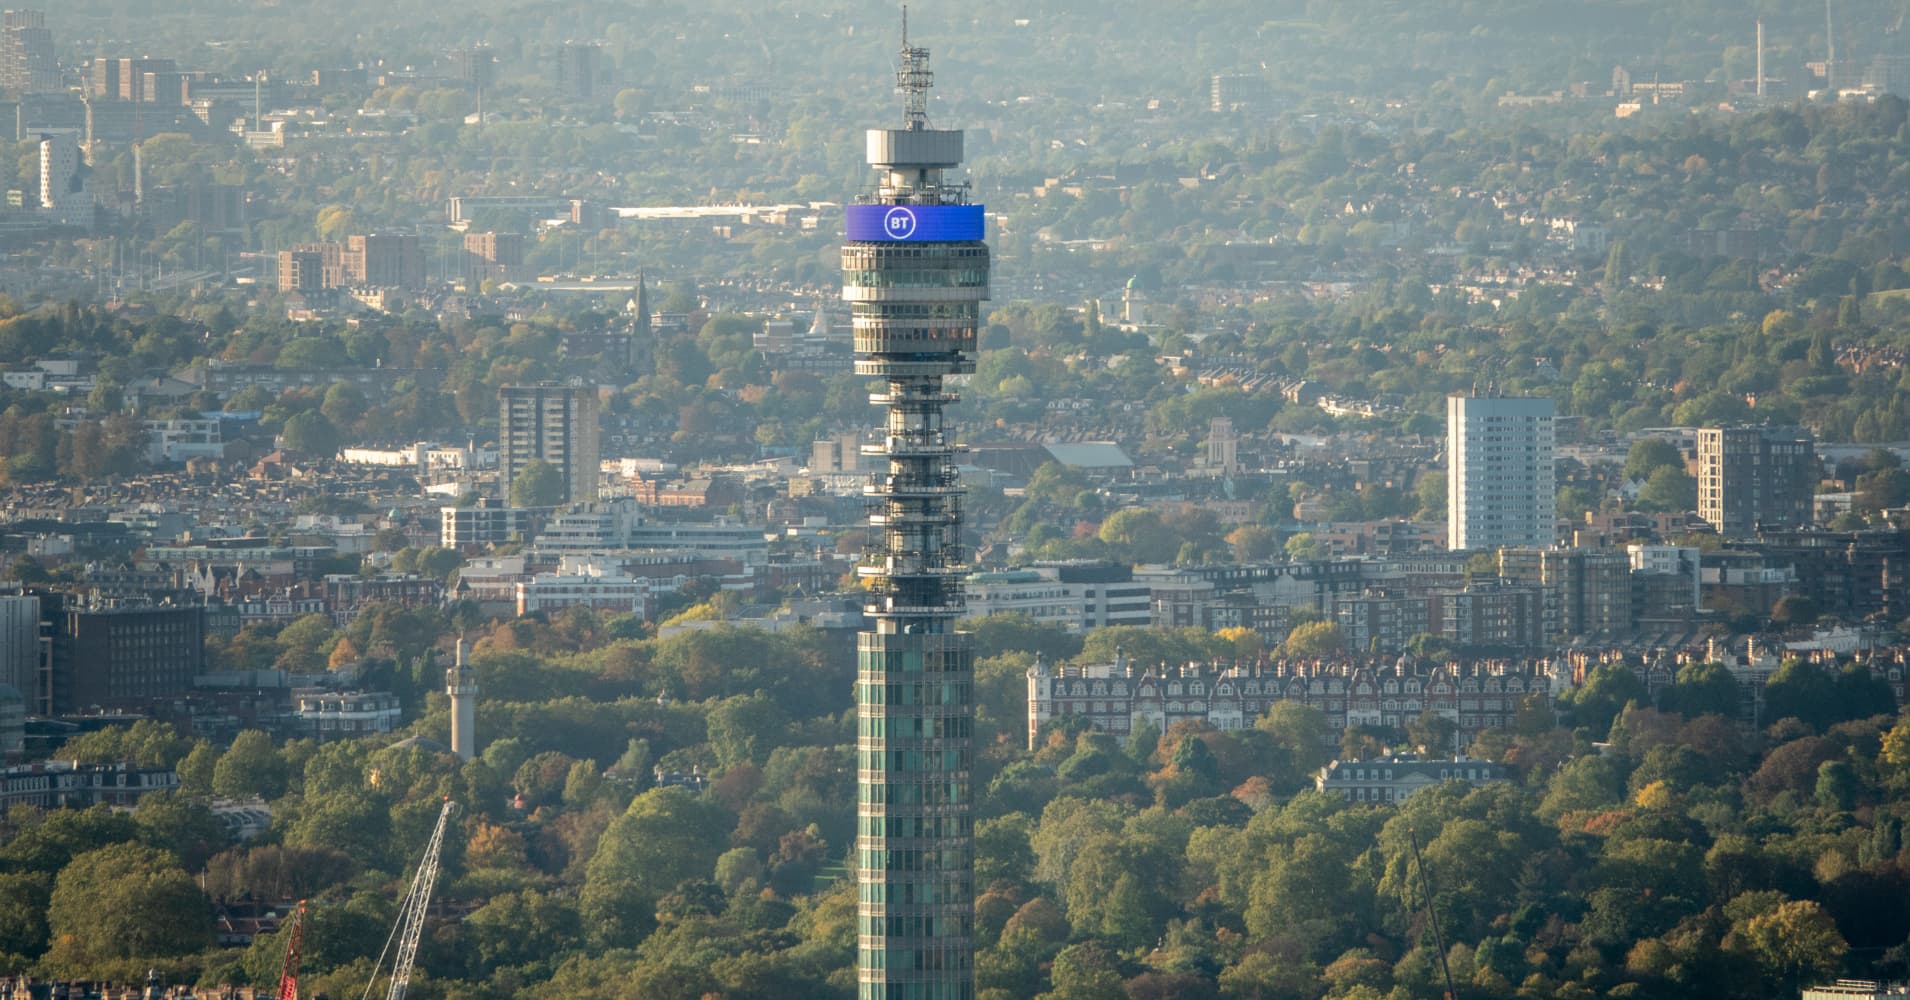 london's famed bt tower sold to u.s. hotel group for $347 million